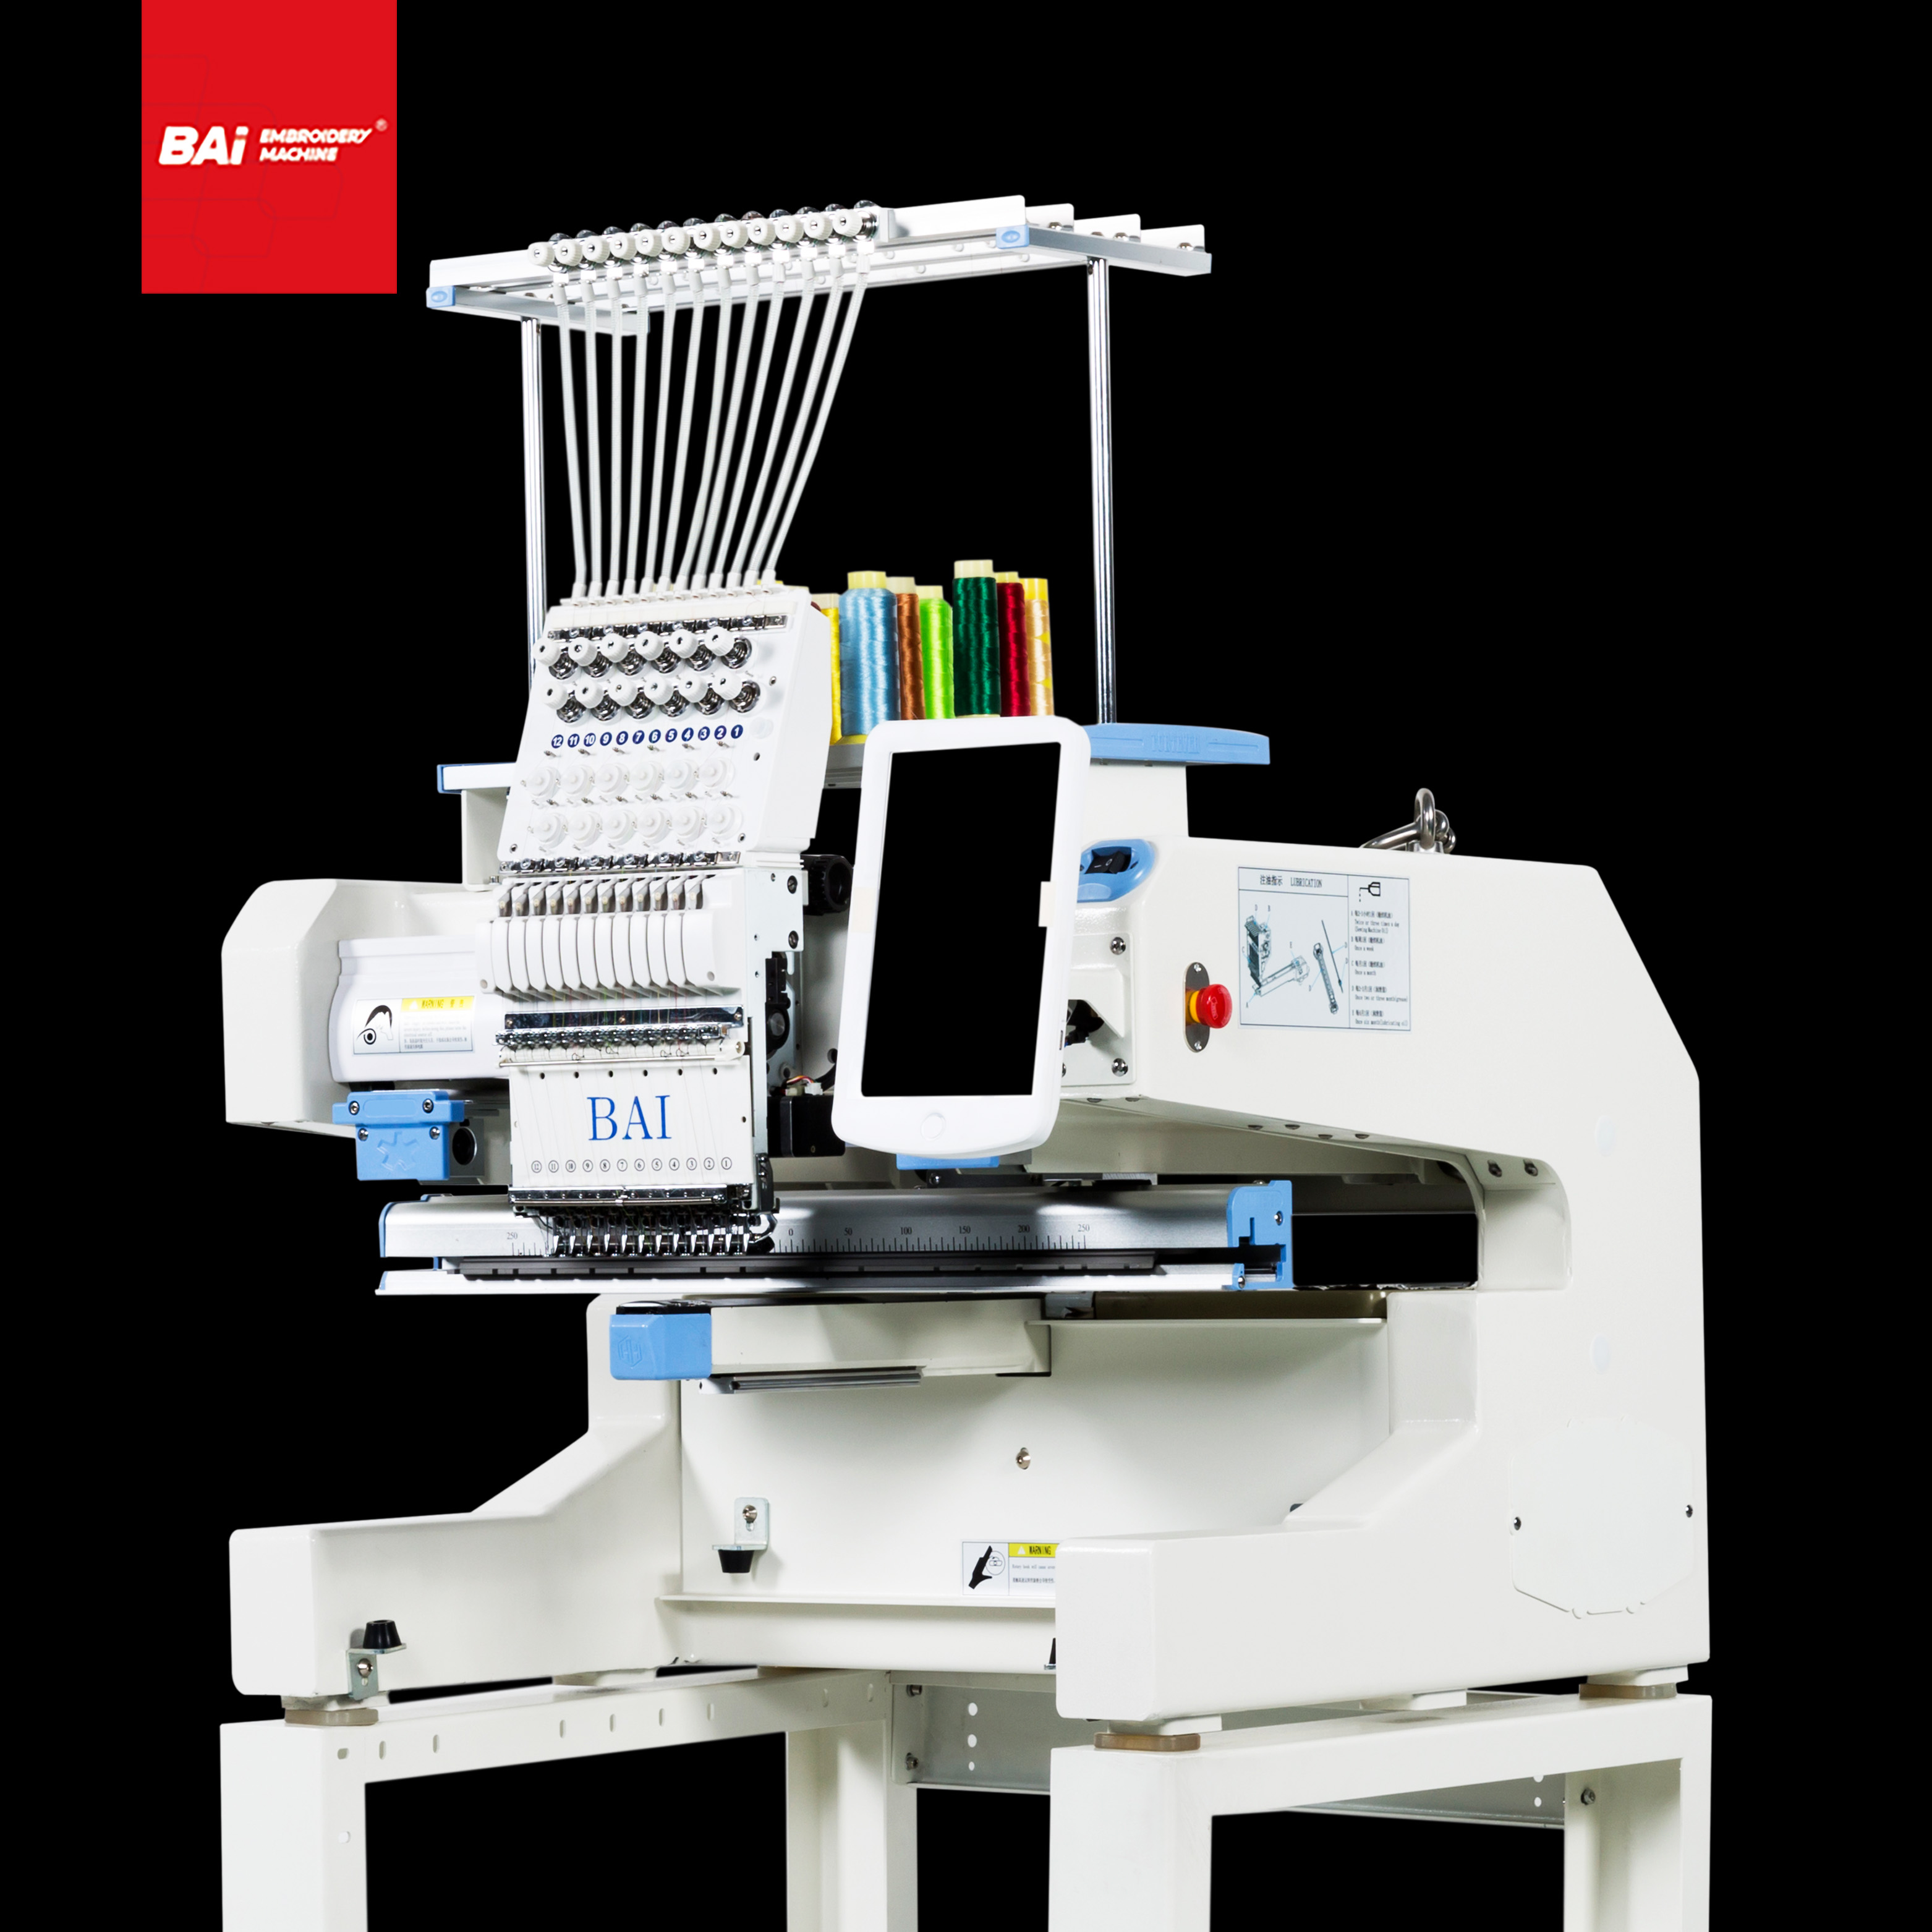 BAI Latest Embroidery Machine for Professional with Computer